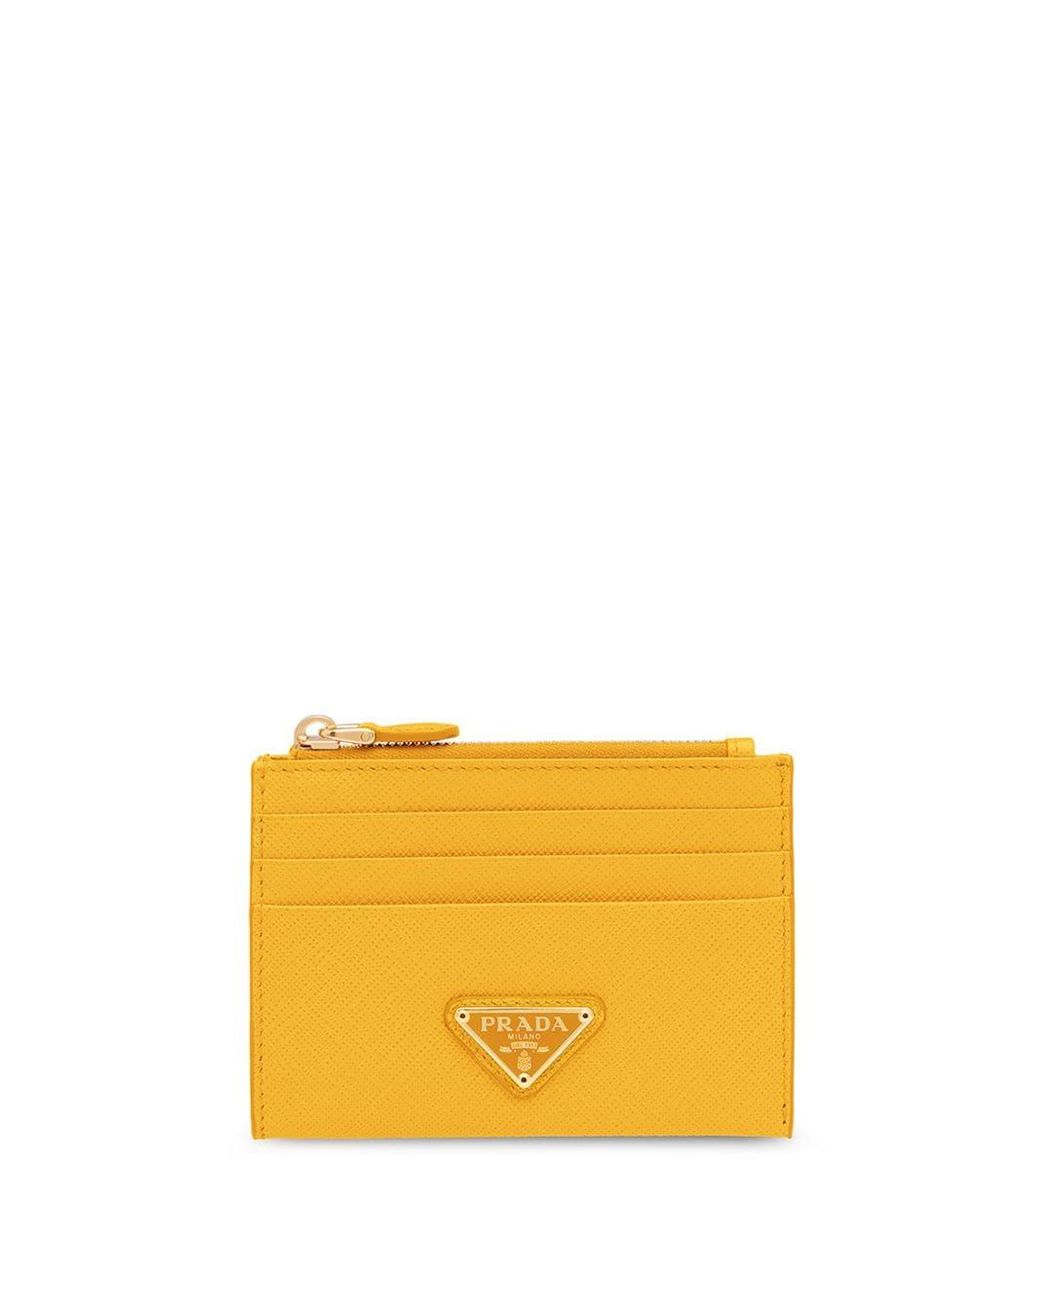 Prada Leather Saffiano Credit Card Holder in Yellow - Lyst